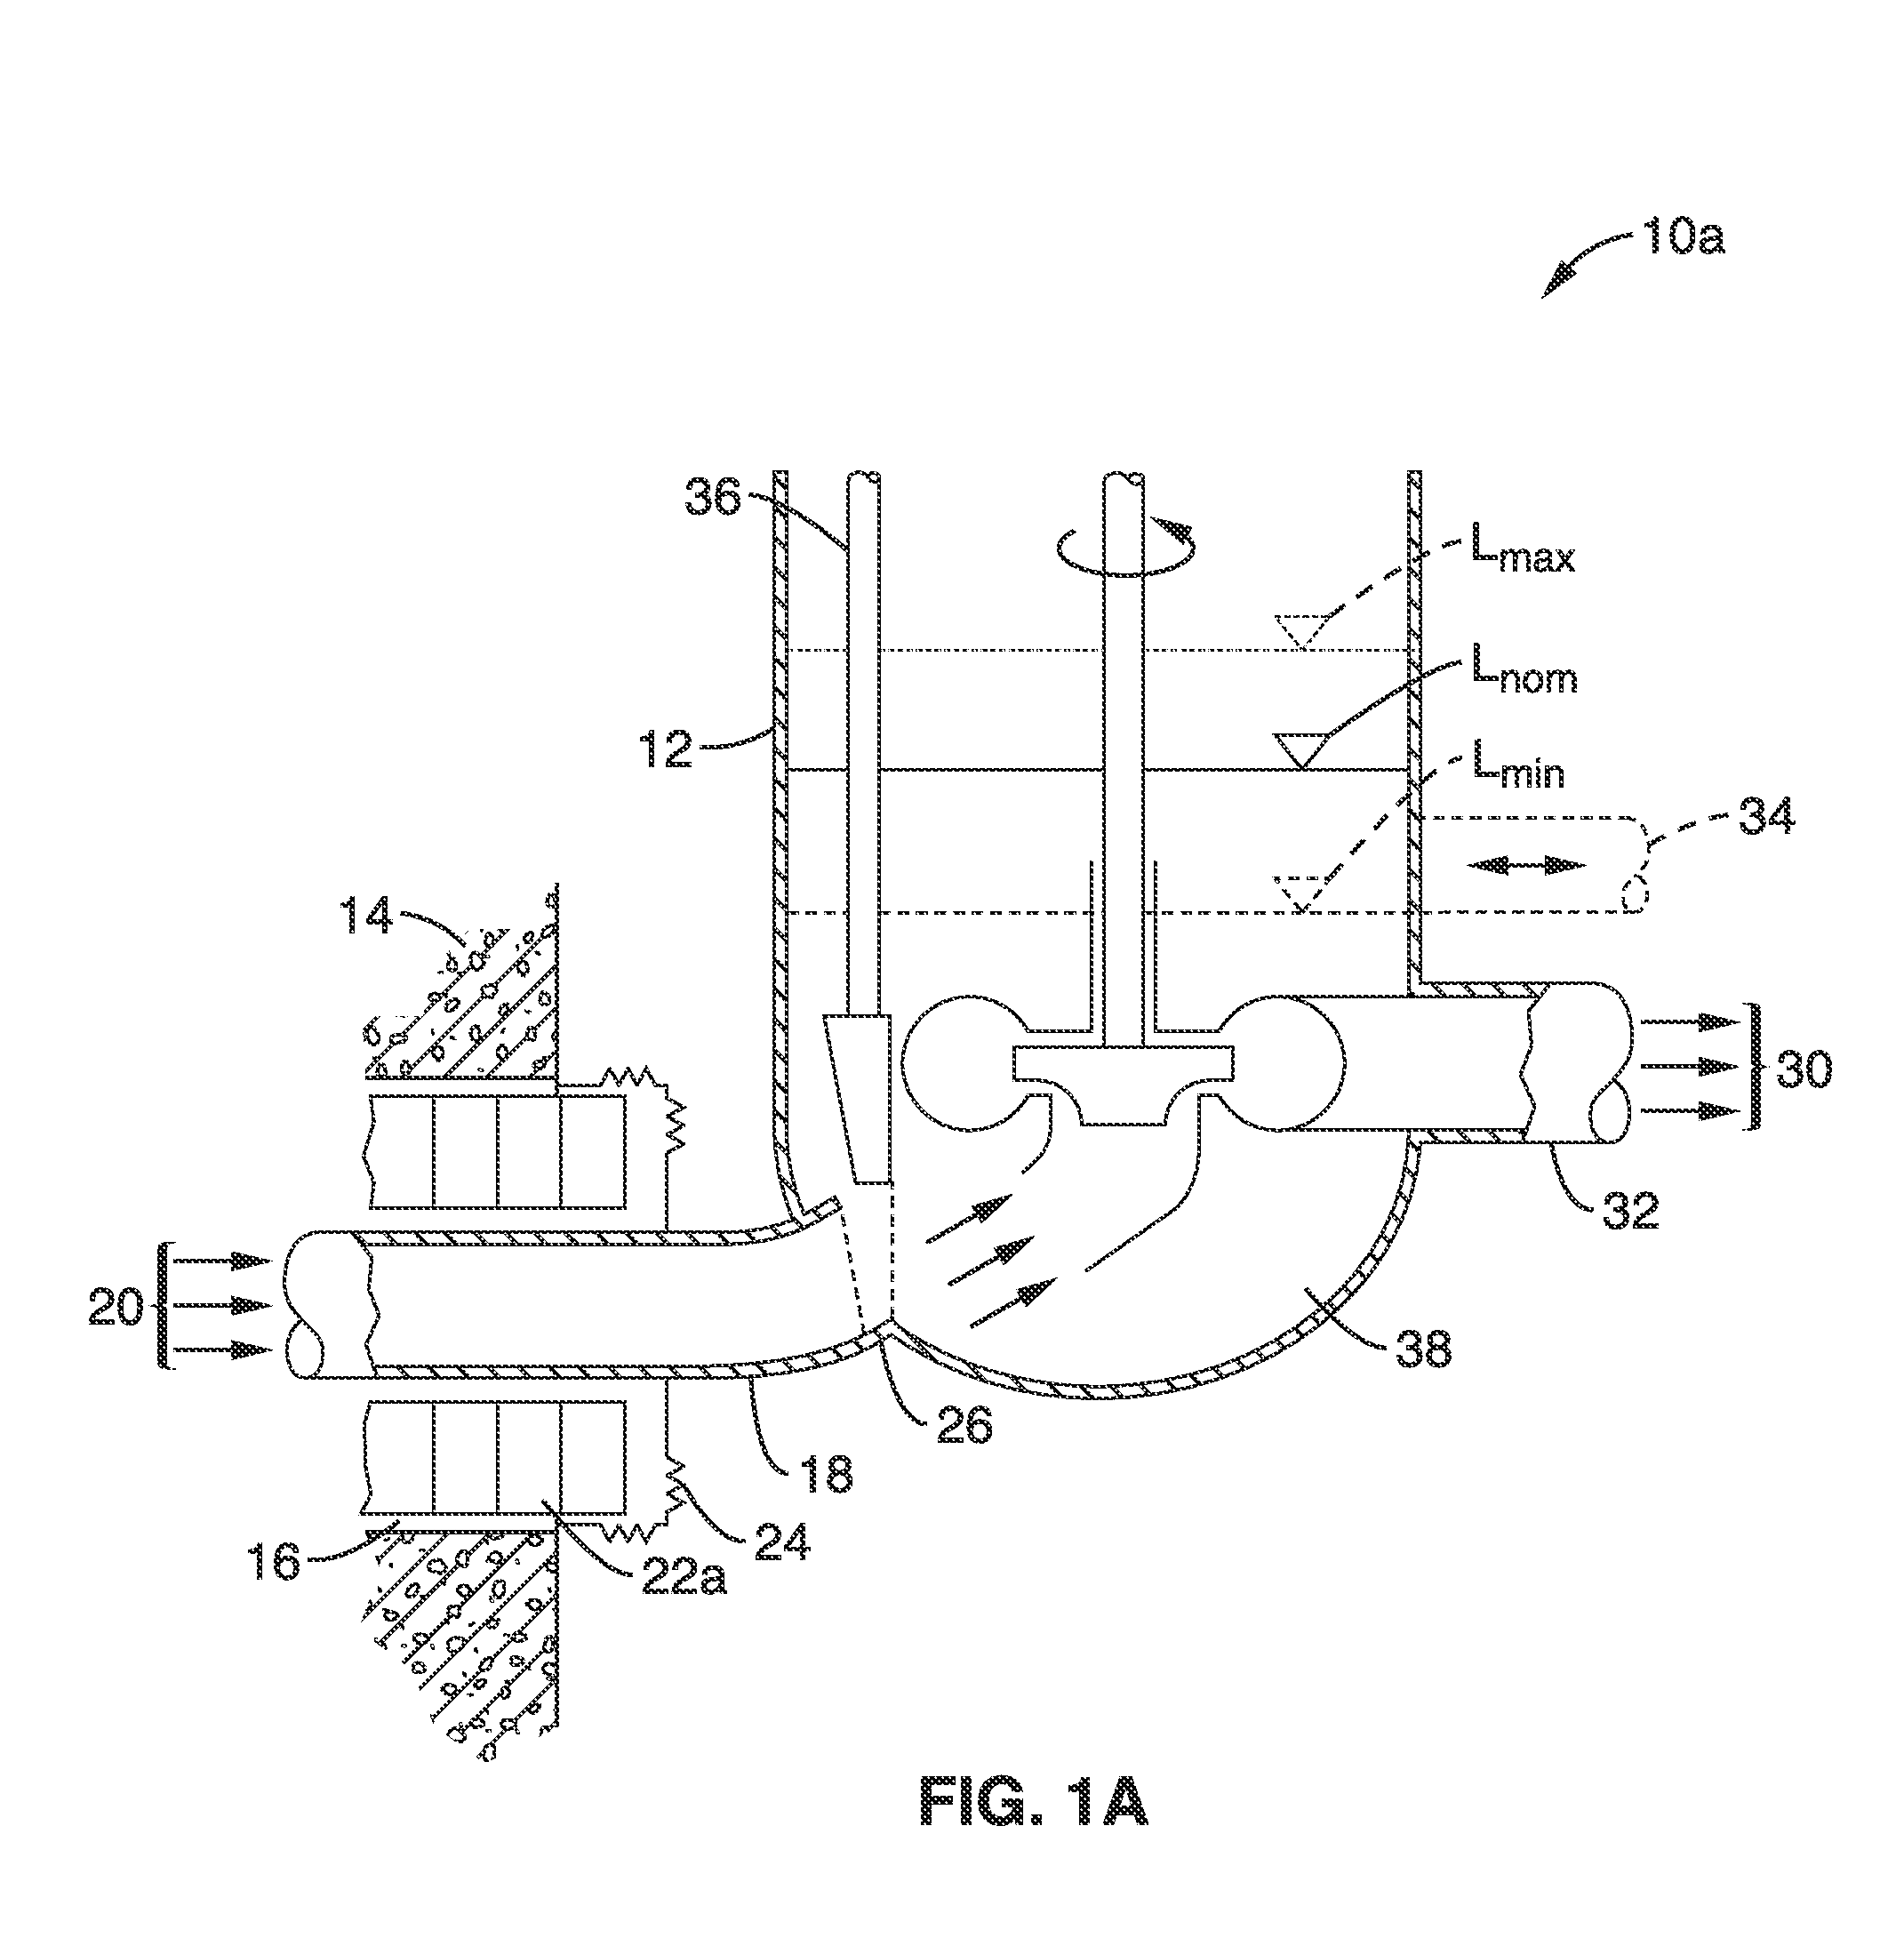 Systems and methods for enhancing isolation of high-temperature reactor containments